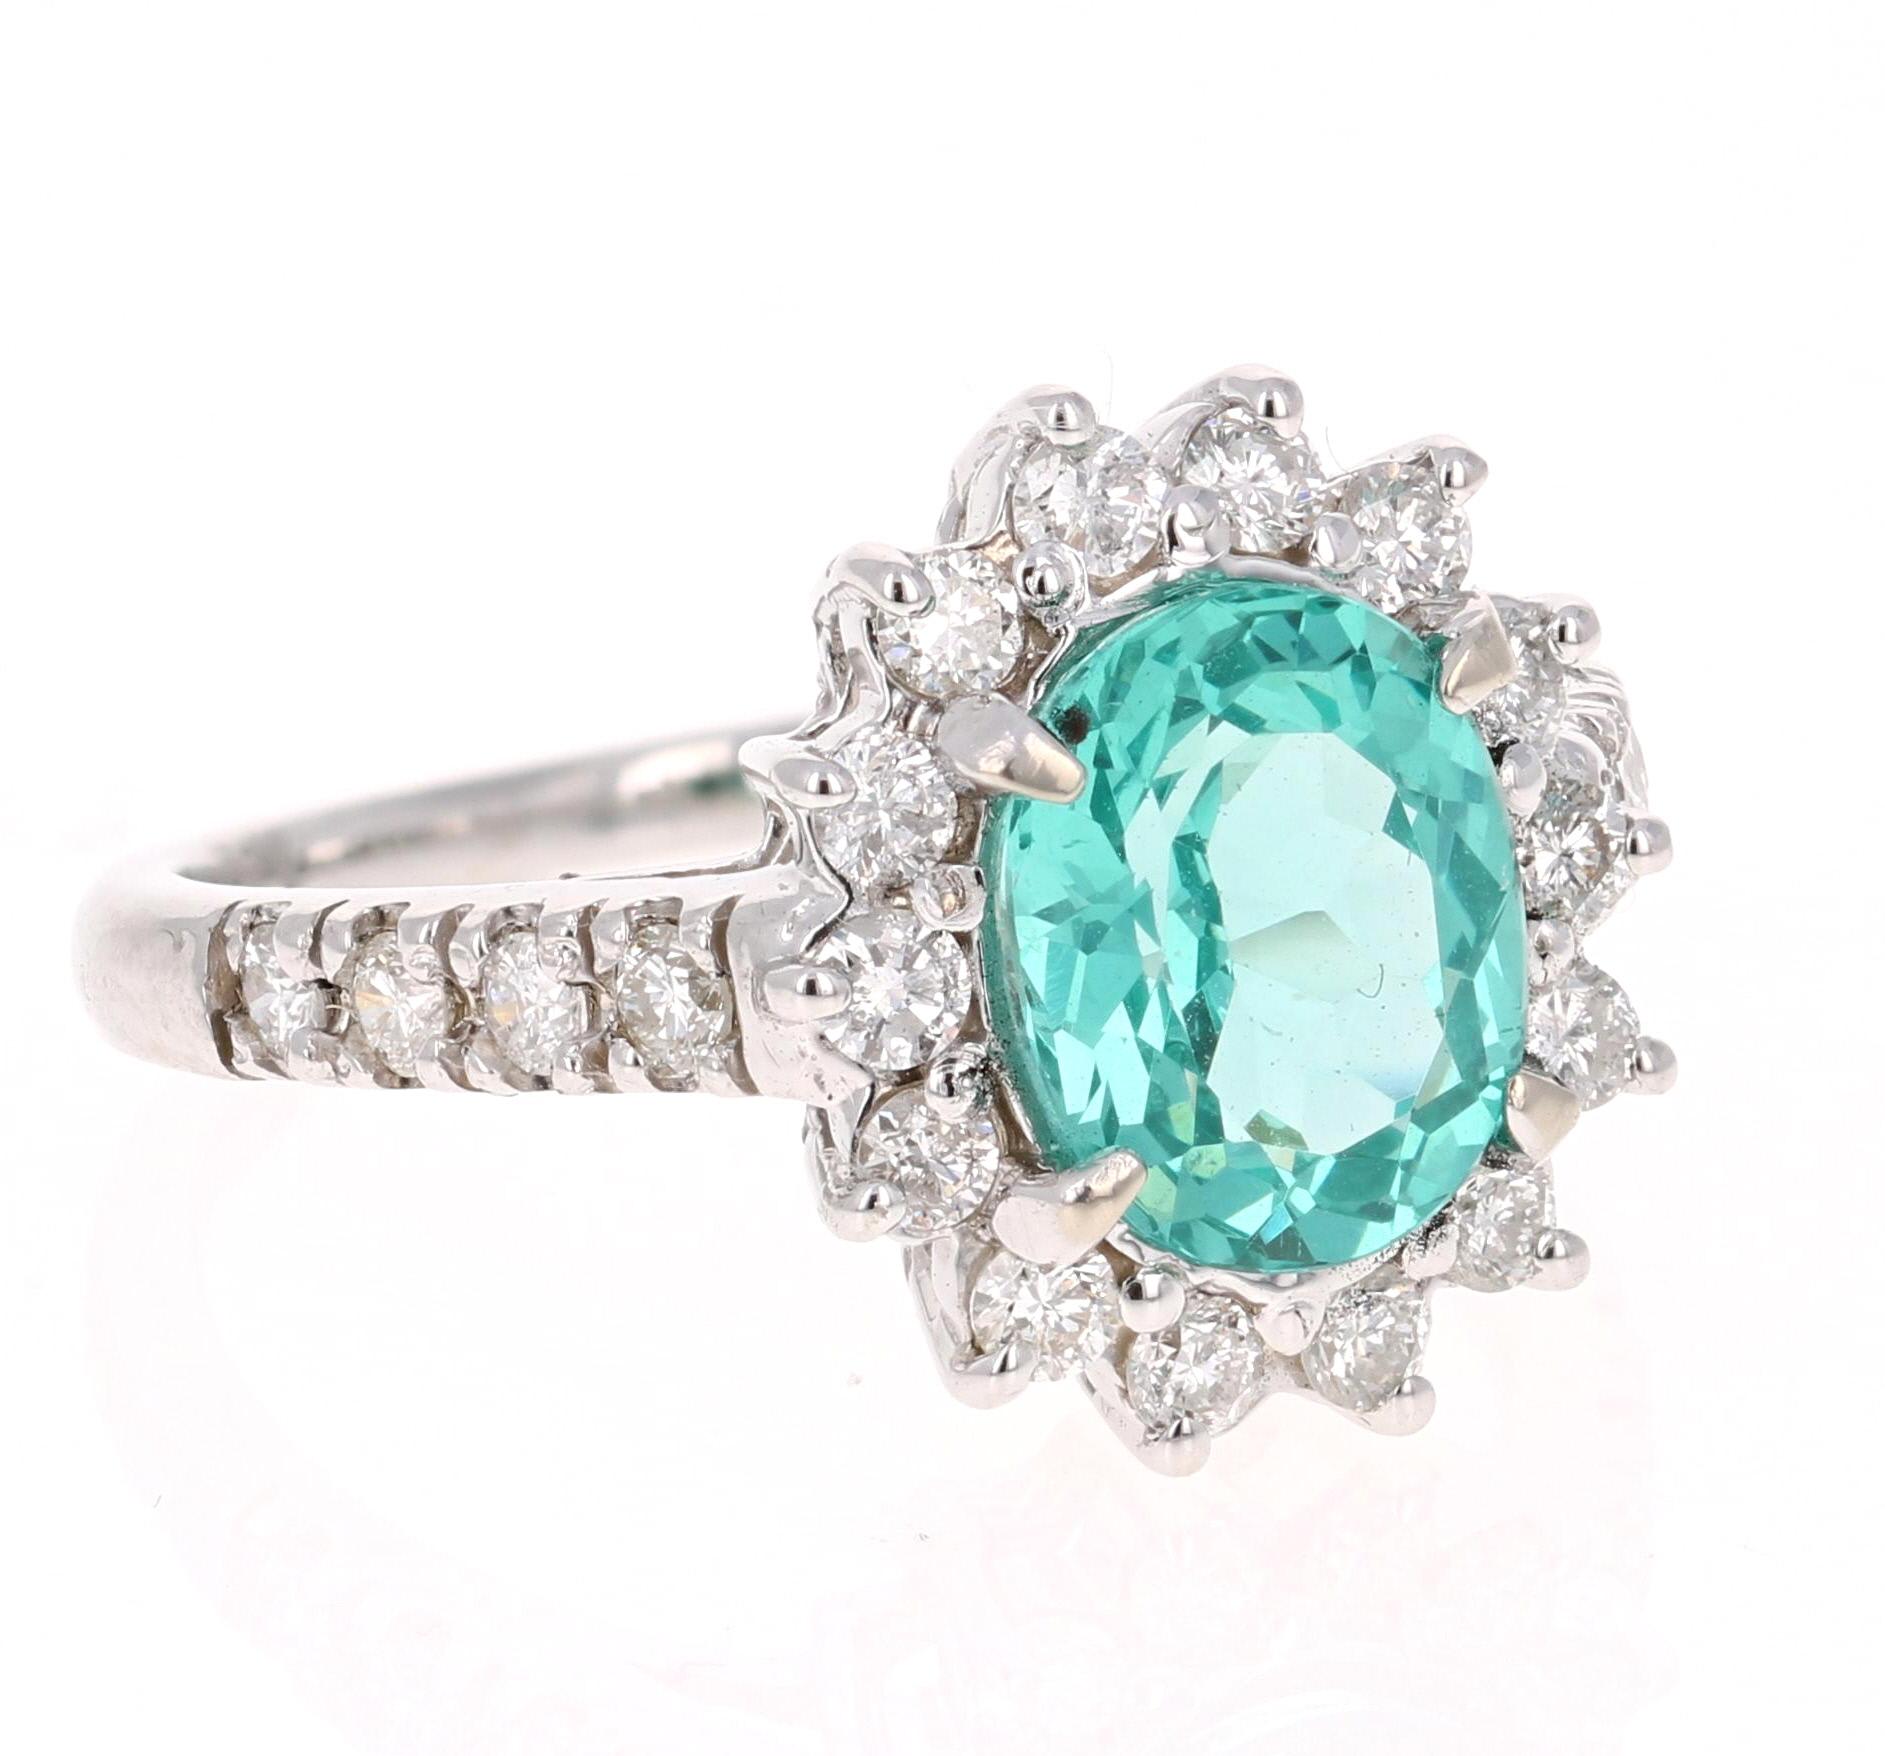 This stunning Apatite and Diamond Ring can easily transform into a unique and classy engagement ring for your special someone!  

Apatites are found in various places around the world including Myanmar, Kenya, India, Brazil, Sri Lanka, Norway,